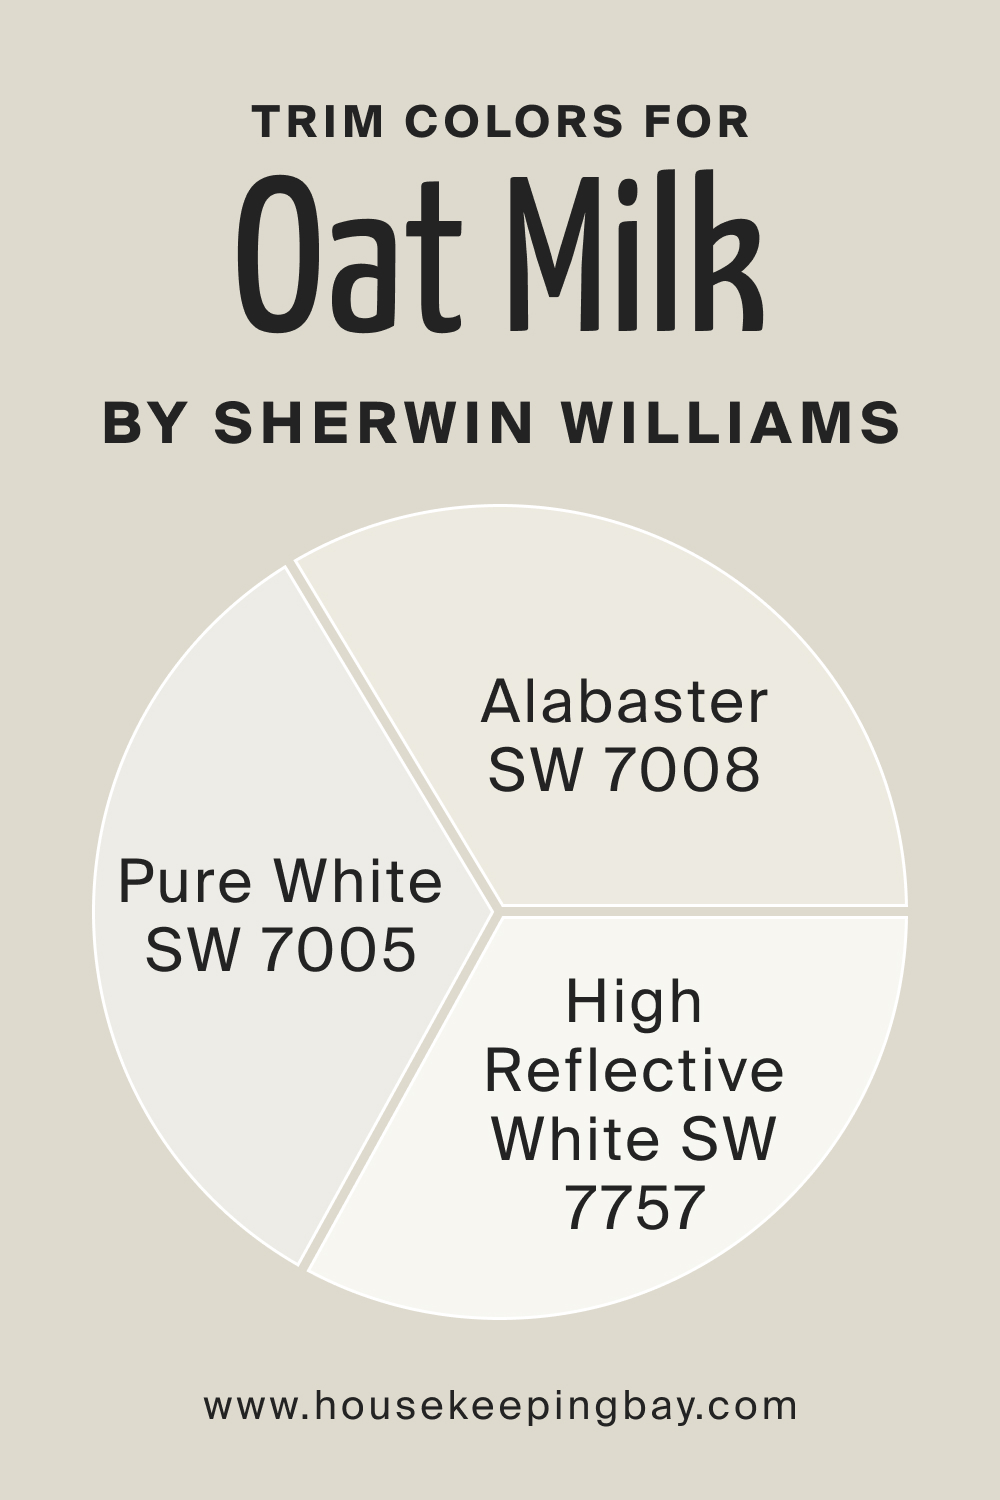 Trim Colors of SW 9501 Oat Milk by Sherwin Williams